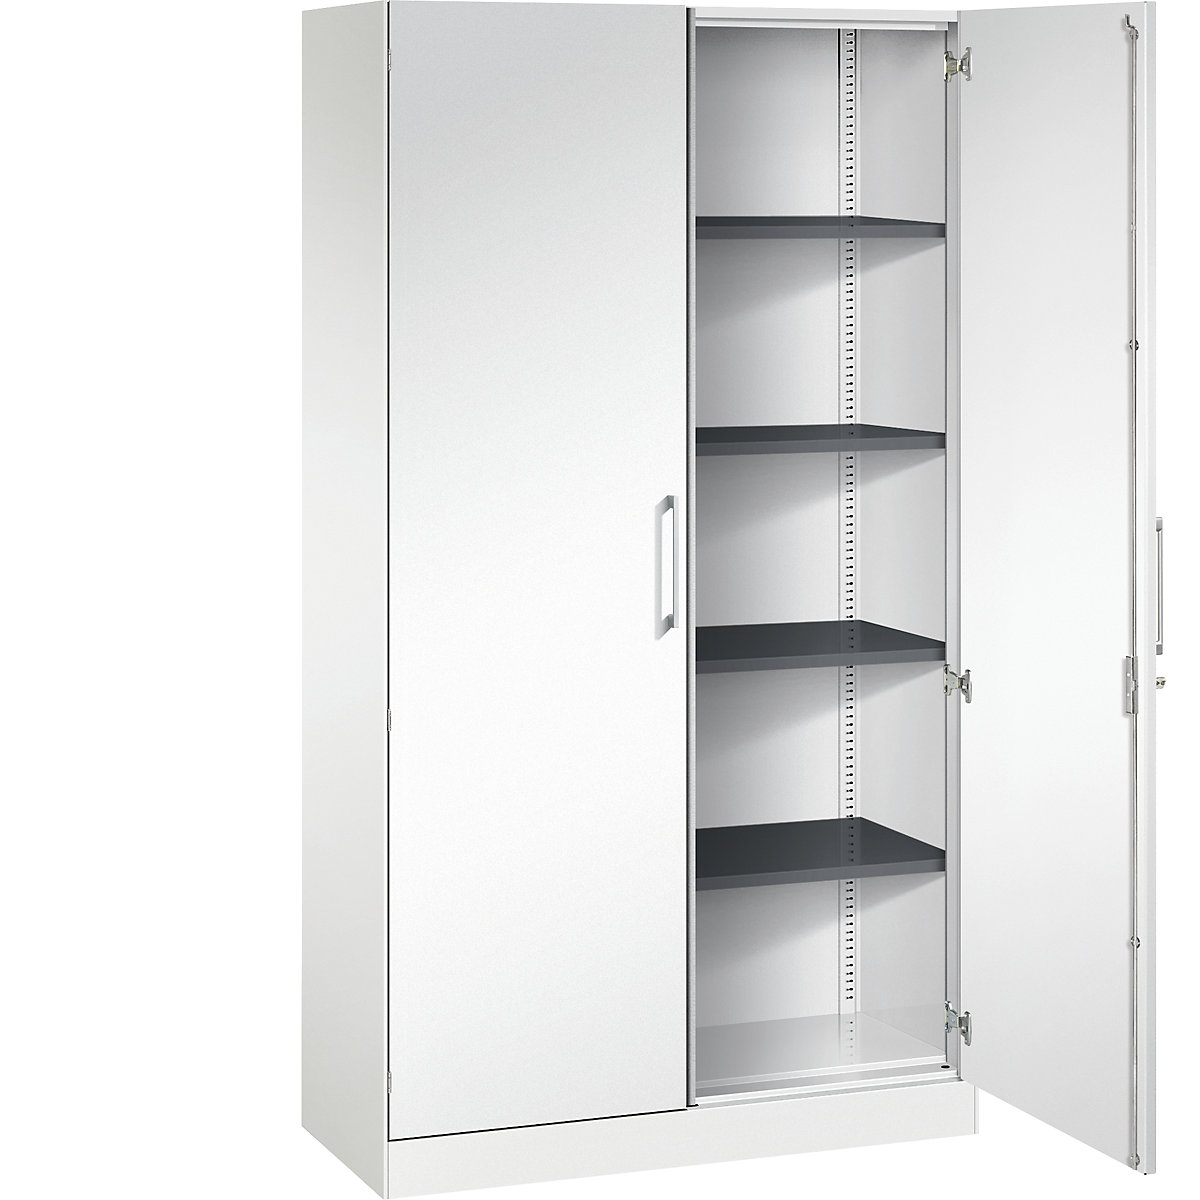 ASISTO double door cupboard, height 1980 mm – C+P, width 1000 mm, 4 shelves, traffic white/traffic white-5